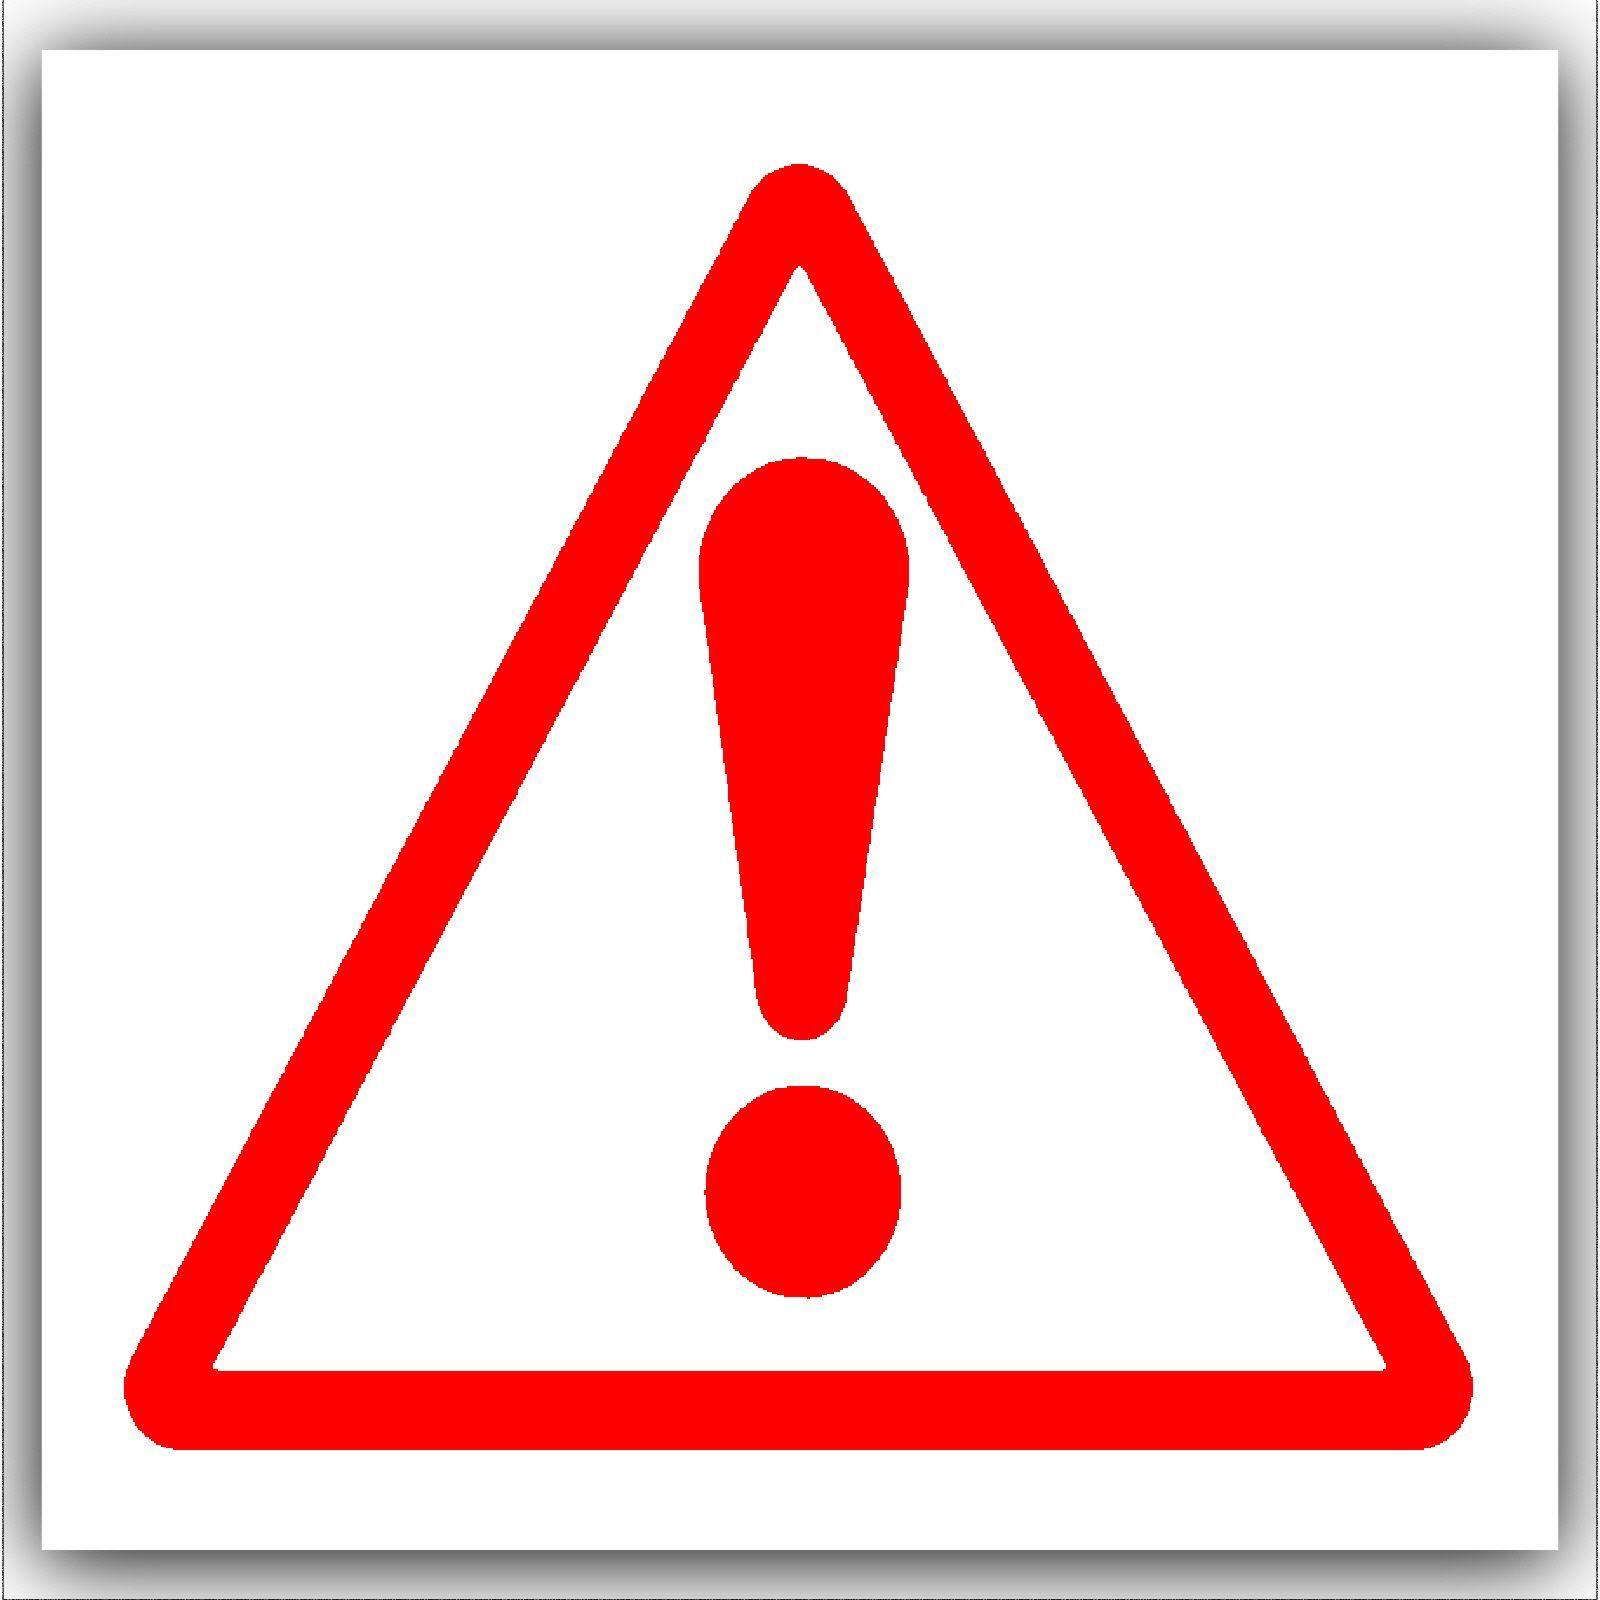 Red and White P Logo - X Caution Warning Danger Symbol Red On White External Self